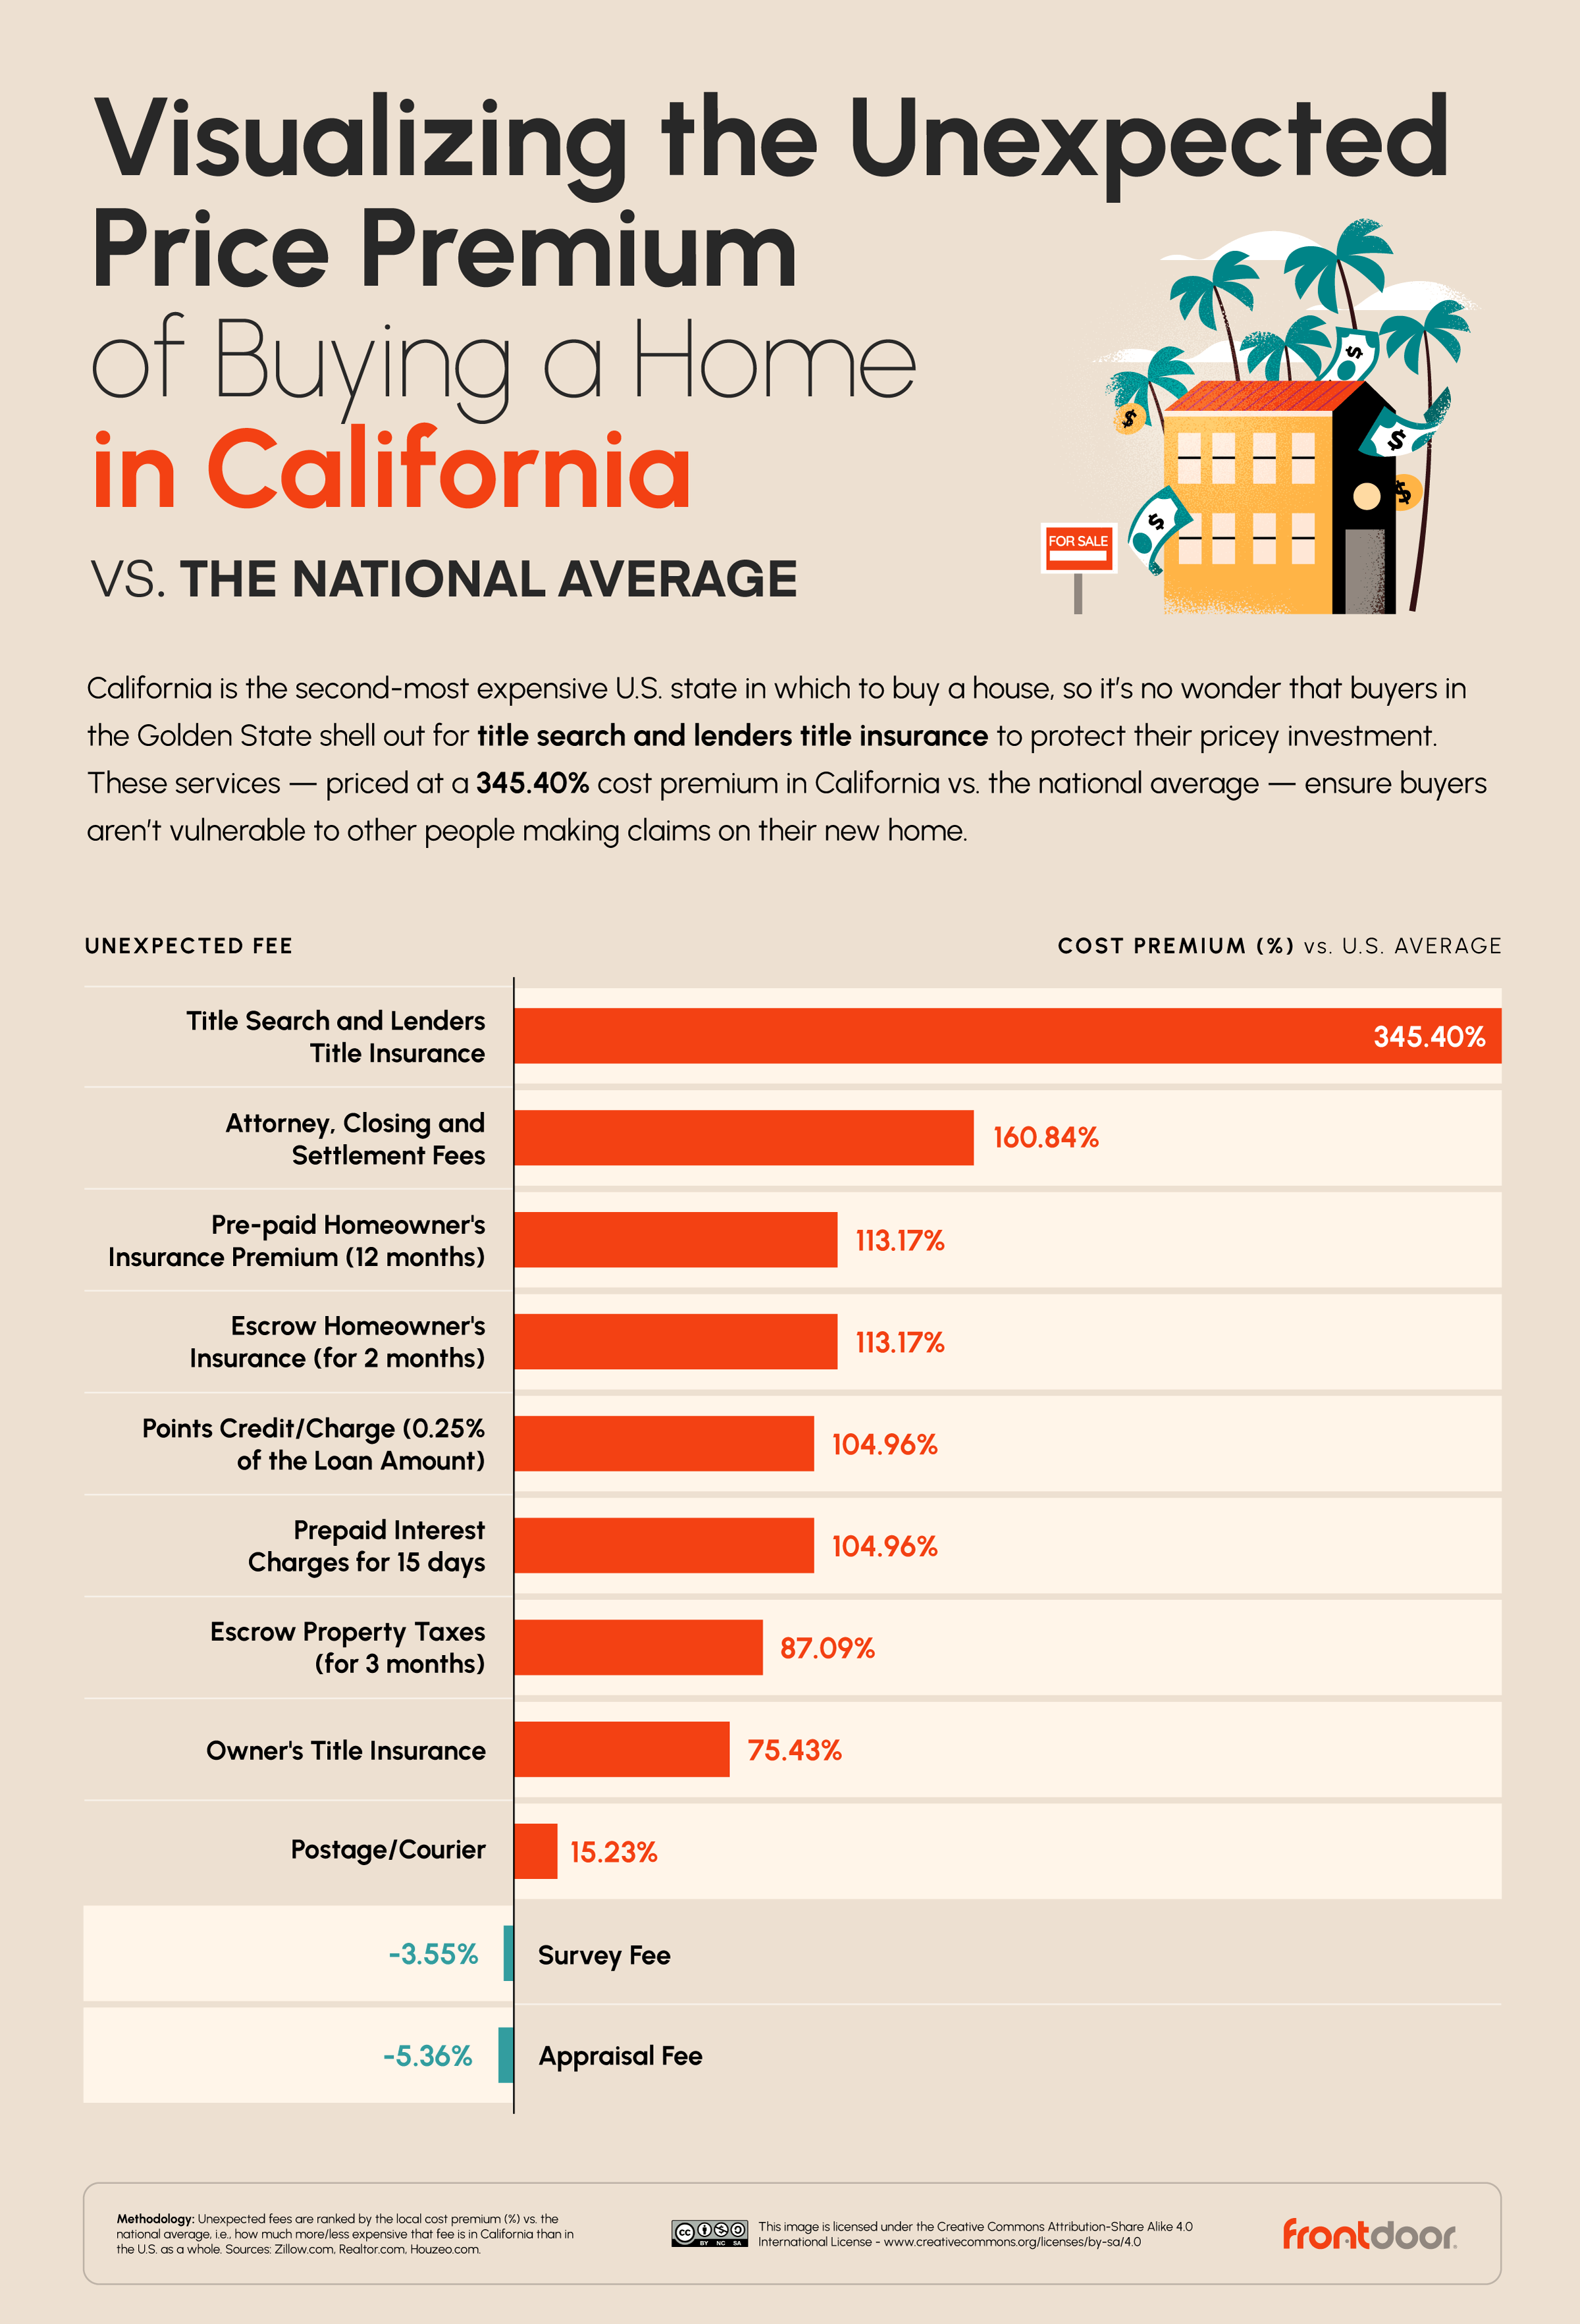 Most Unexpected Hidden Home Buyer Fees in California 